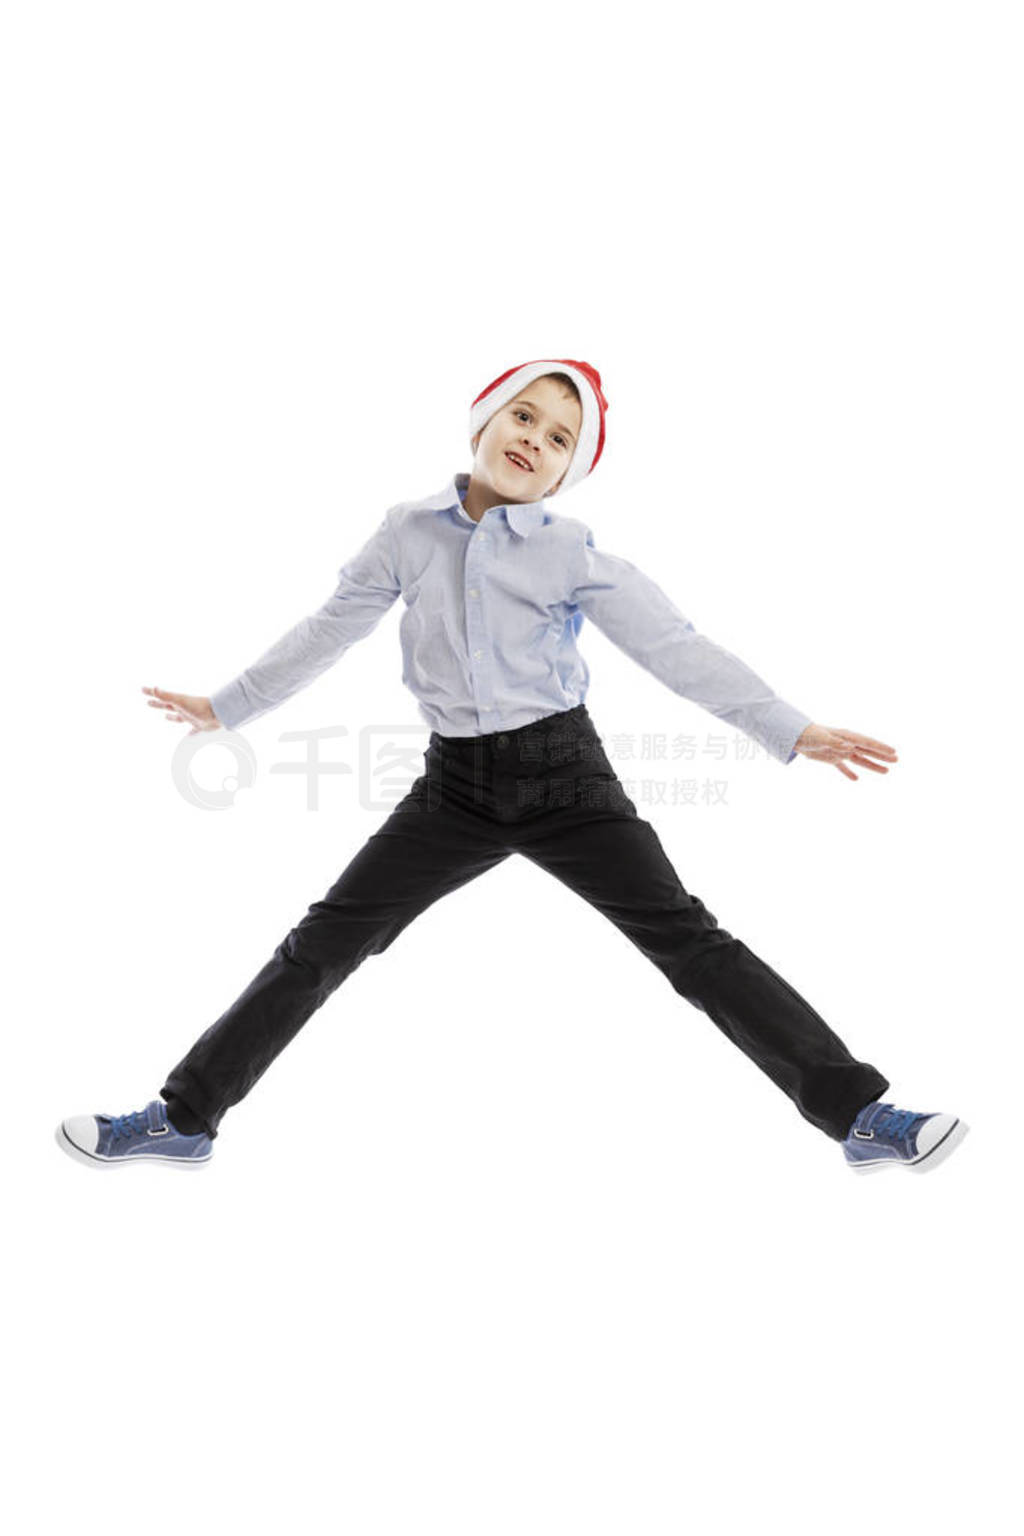 Smiling jumping schoolboy in Santa's hat. Full height. Christmas